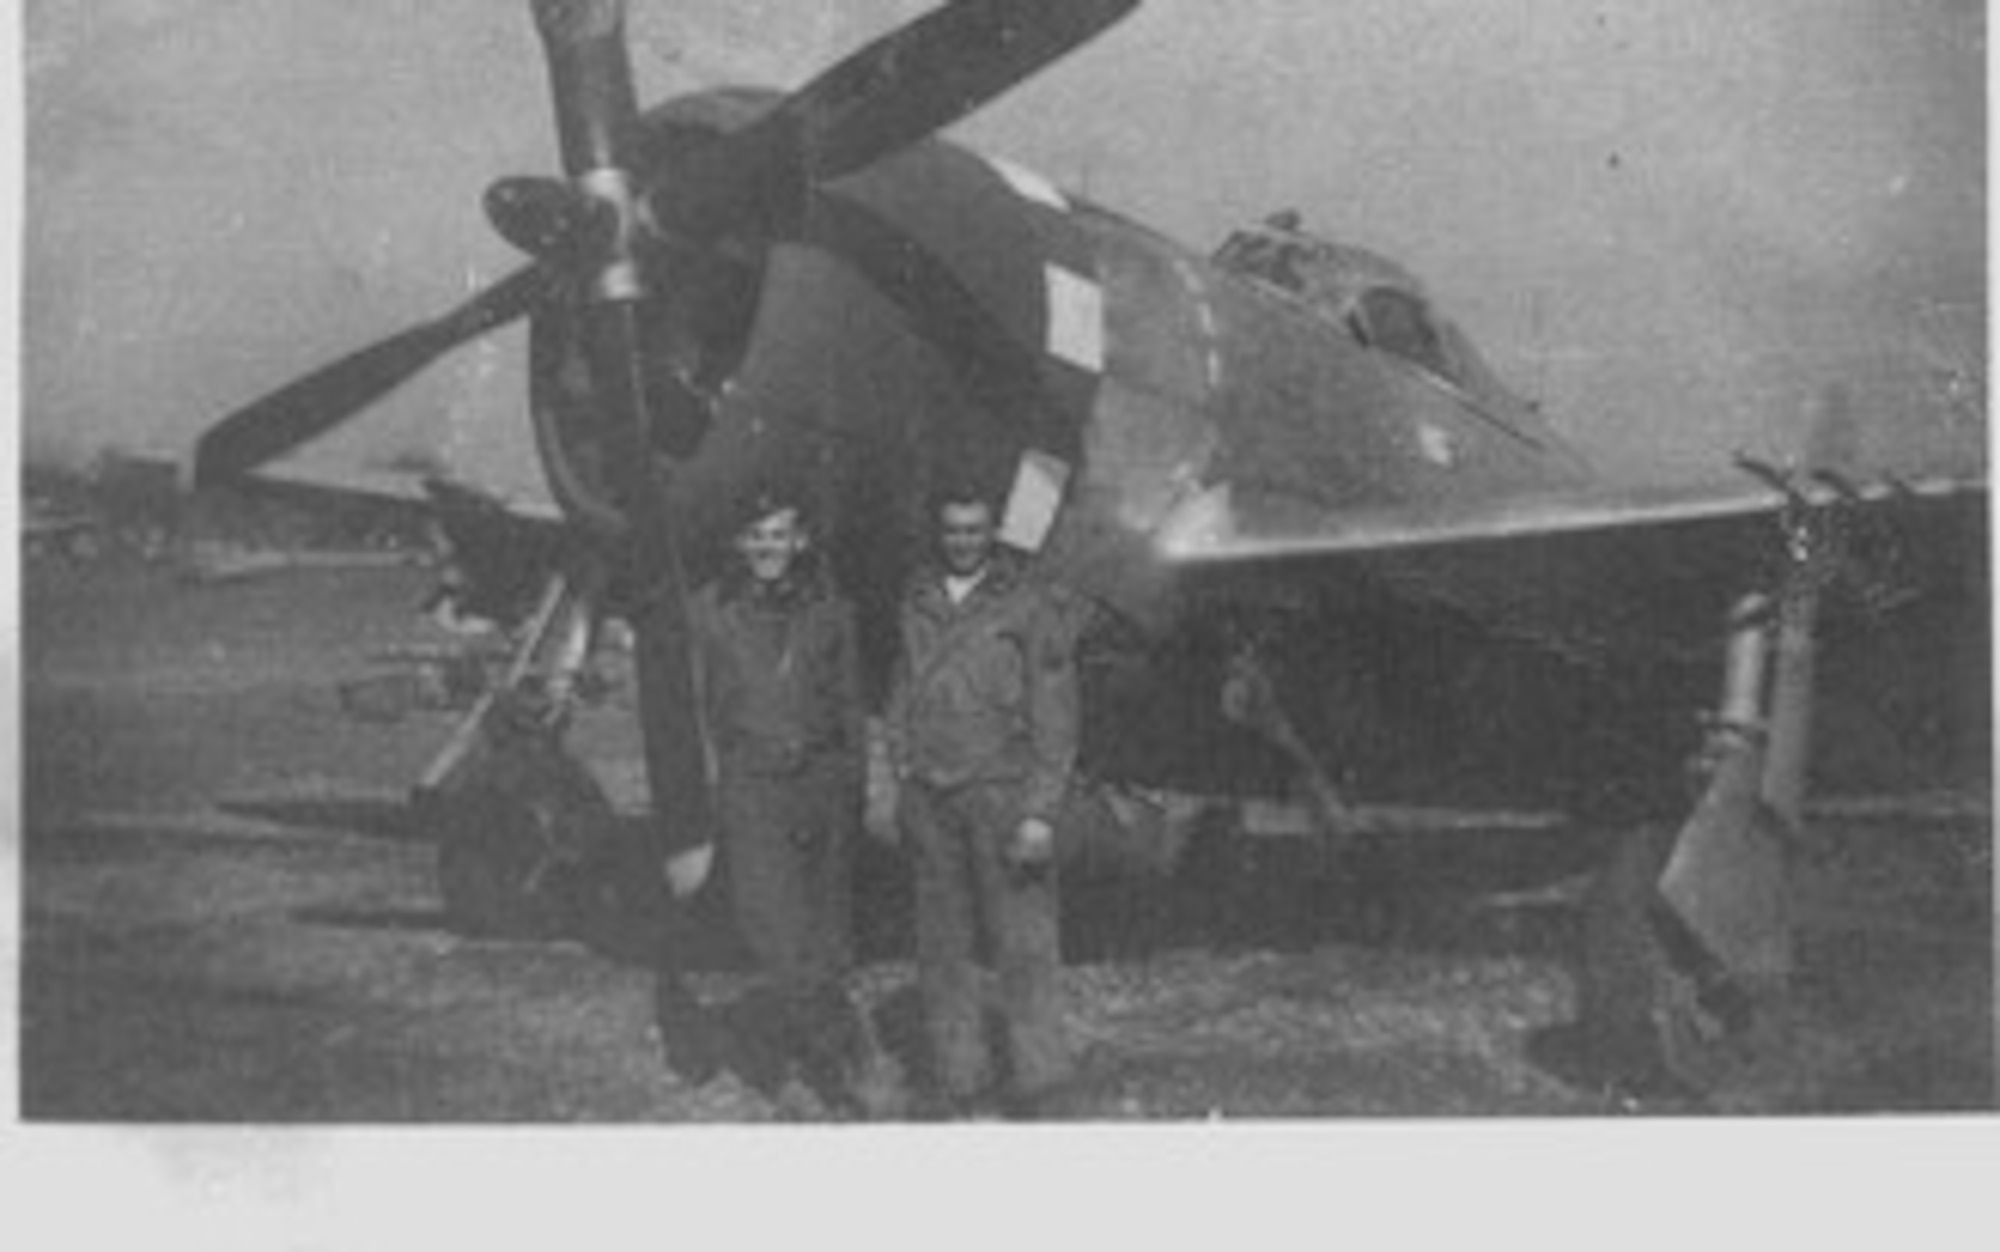 Republic P-47D Thunderbolt fighter-bomber of the 405th Fighter Squadron, flown by 1st Lt. Robert L. Griffith, at left, with an unidentified NCO, likely the crew chief of the aircraft.  The effort to help the Lost Battalion was one of Lt Griffith’s early missions, and he was concerned more about the nasty weather than he was about the enemy. Source:  (Courtesy Mr. Jürg Herzig, Stand Where They Fought website, used with permission)   
